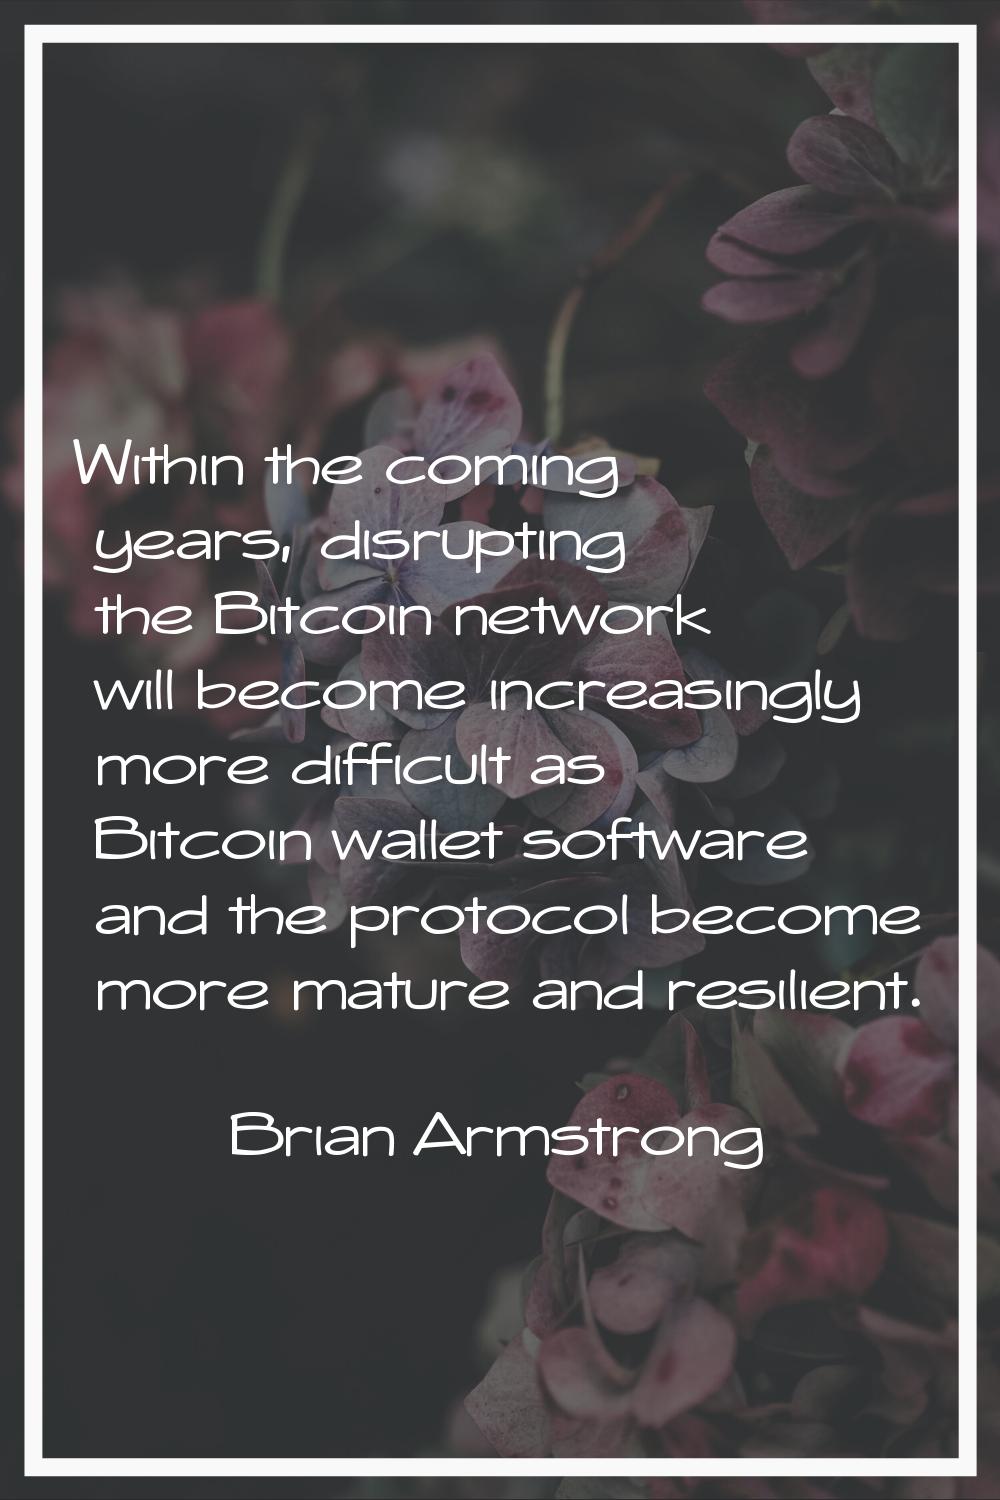 Within the coming years, disrupting the Bitcoin network will become increasingly more difficult as 